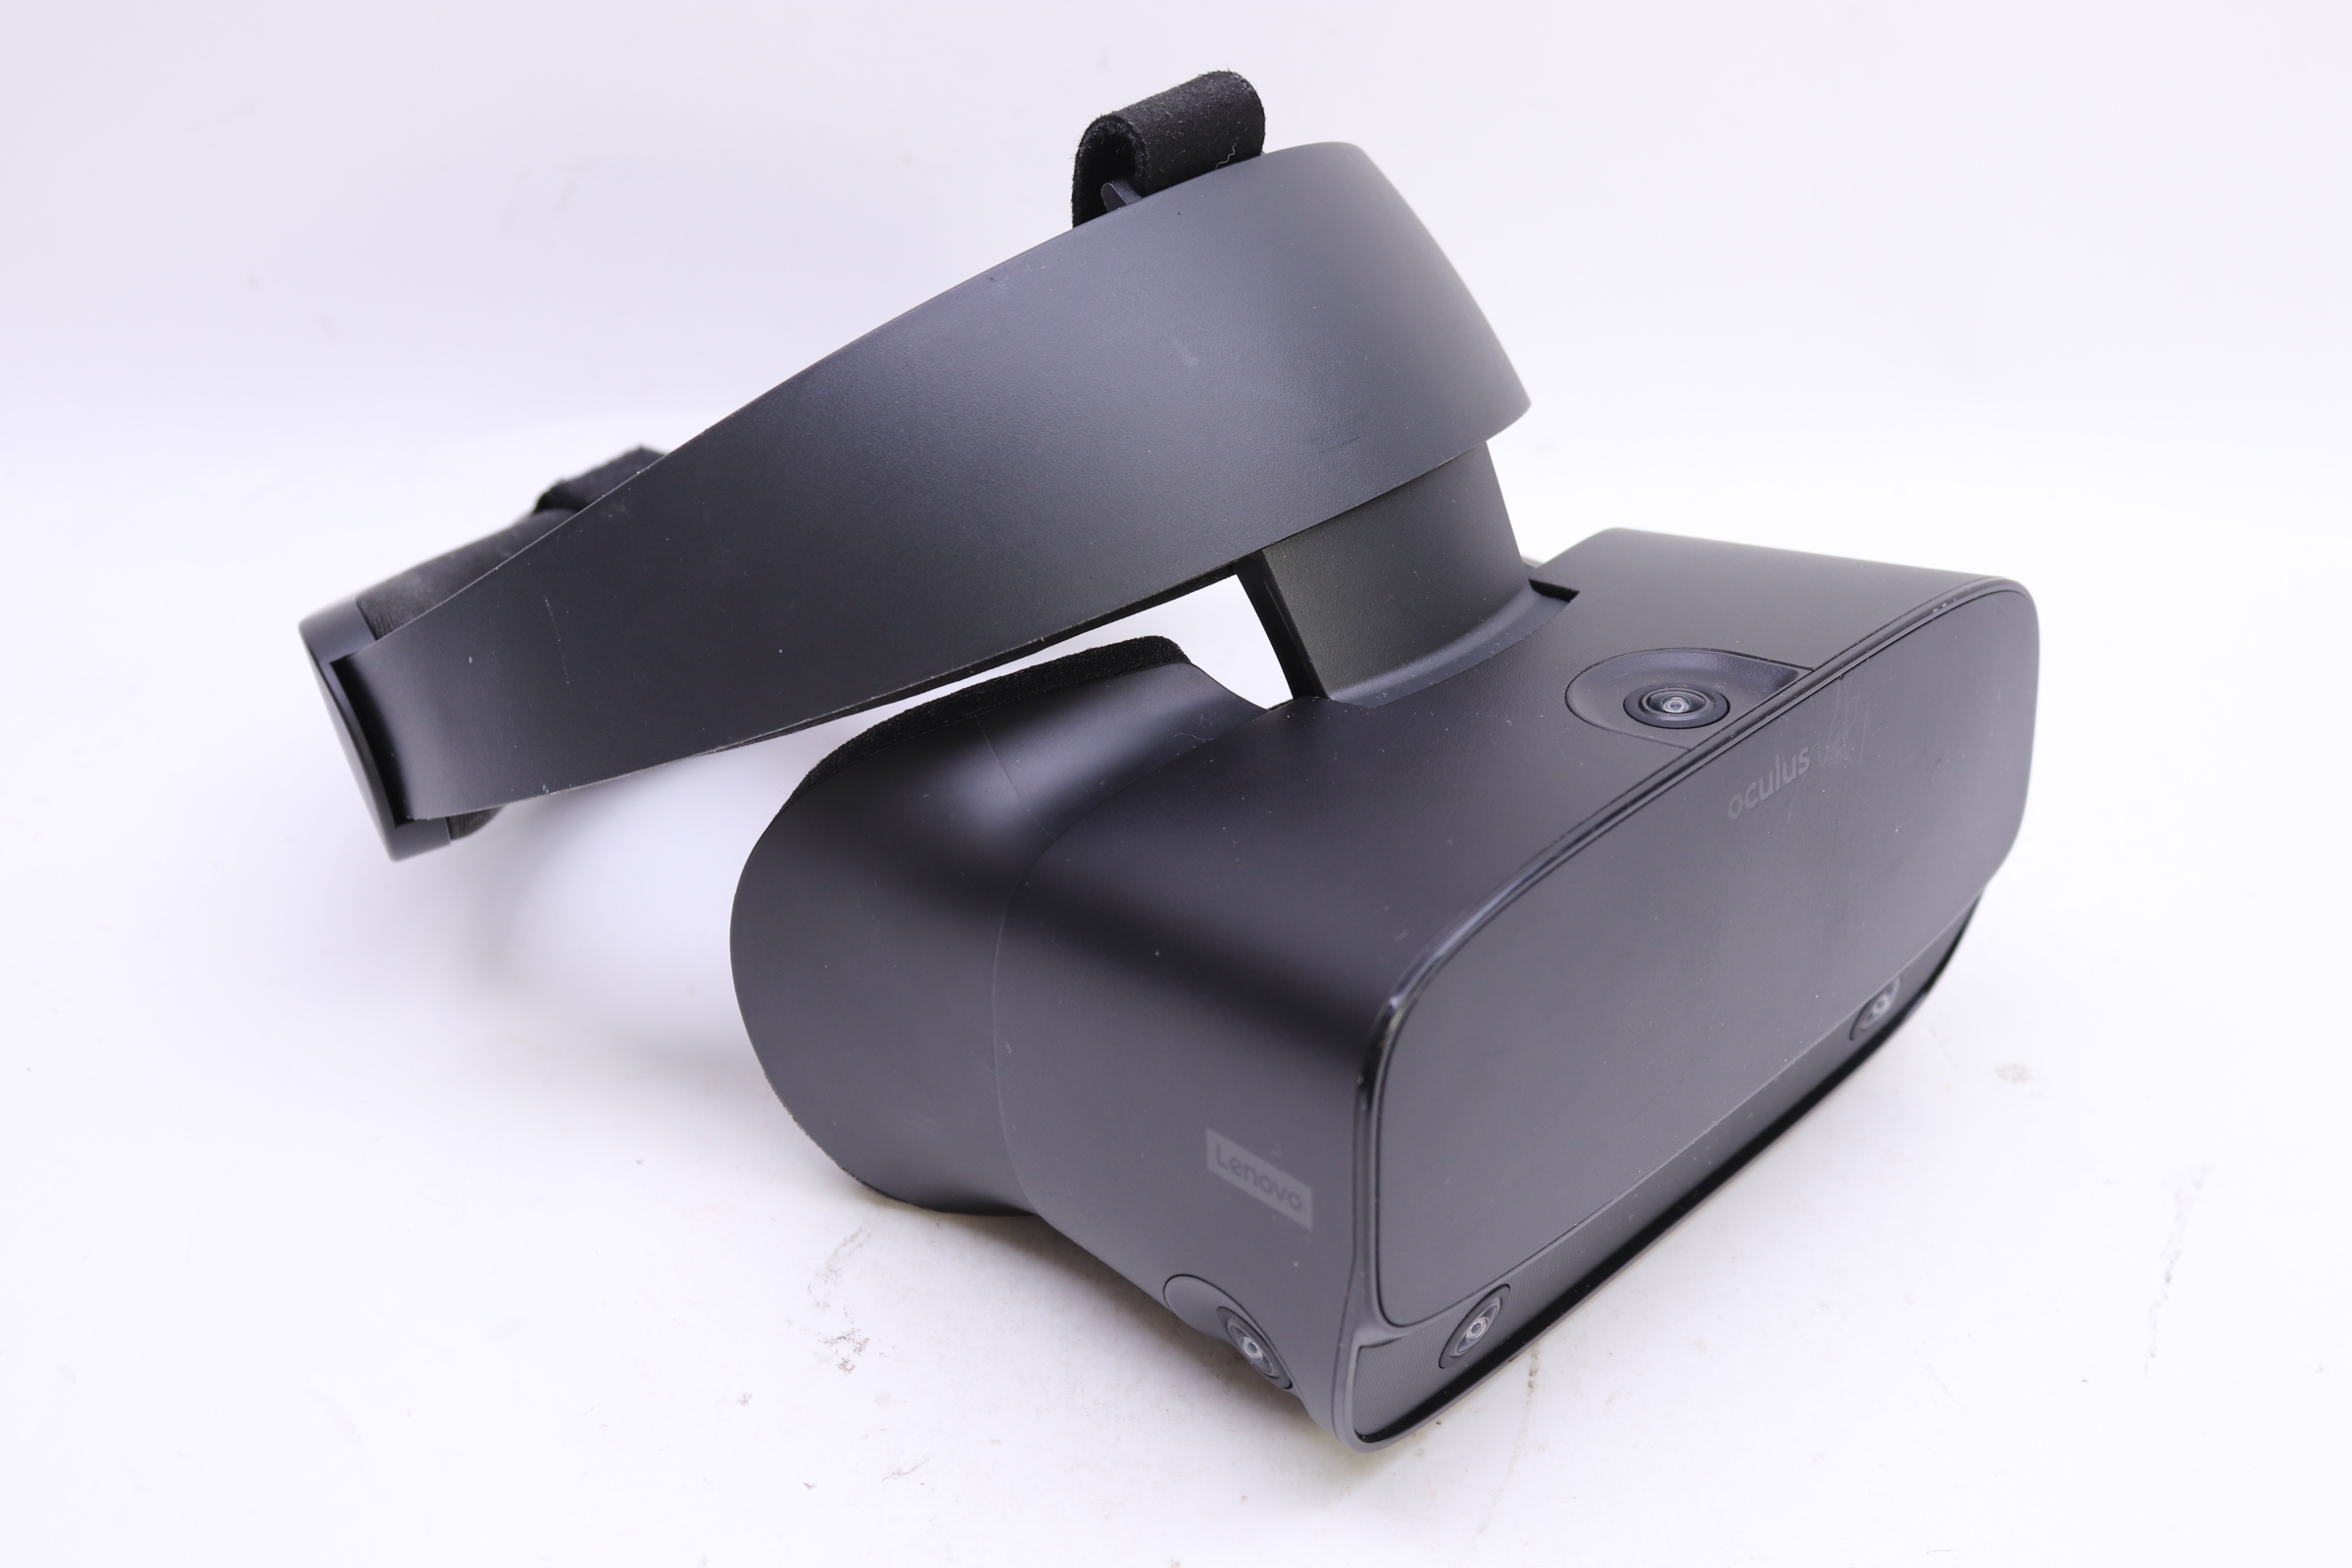 Oculus from Lenovo - VR Headsets & Accessories